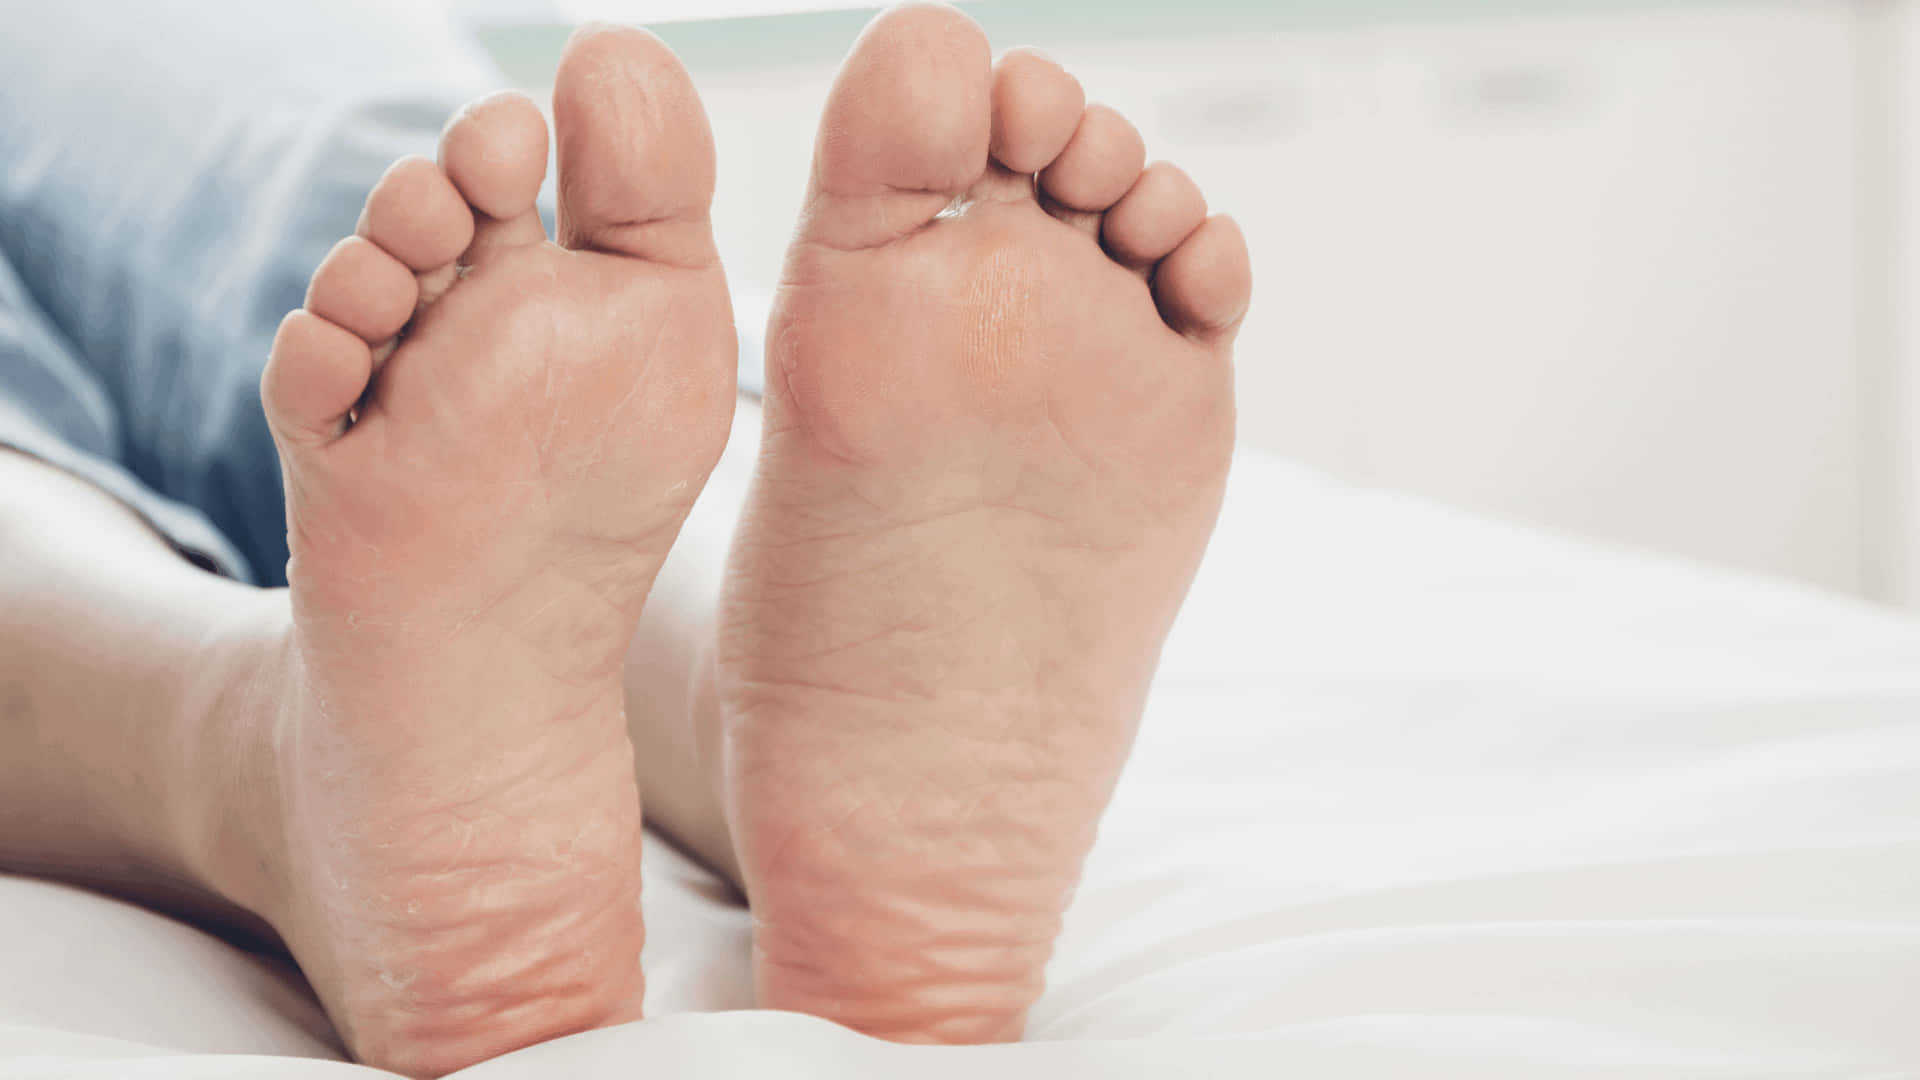 Man Relaxing on Bed - Closeup of Male Feet Wallpaper